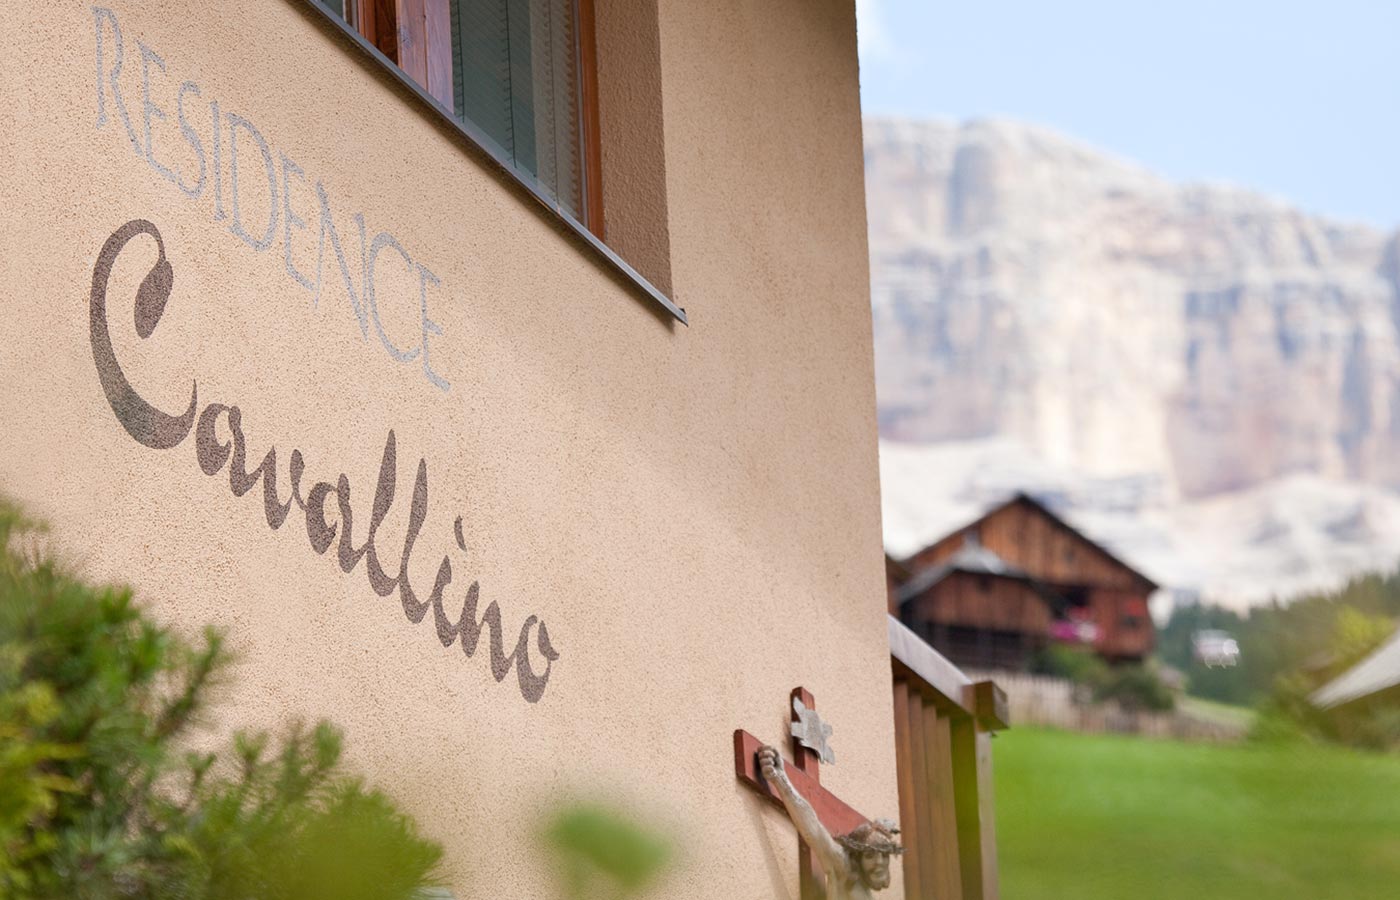 Writing 'Cavallino' on the hotel front